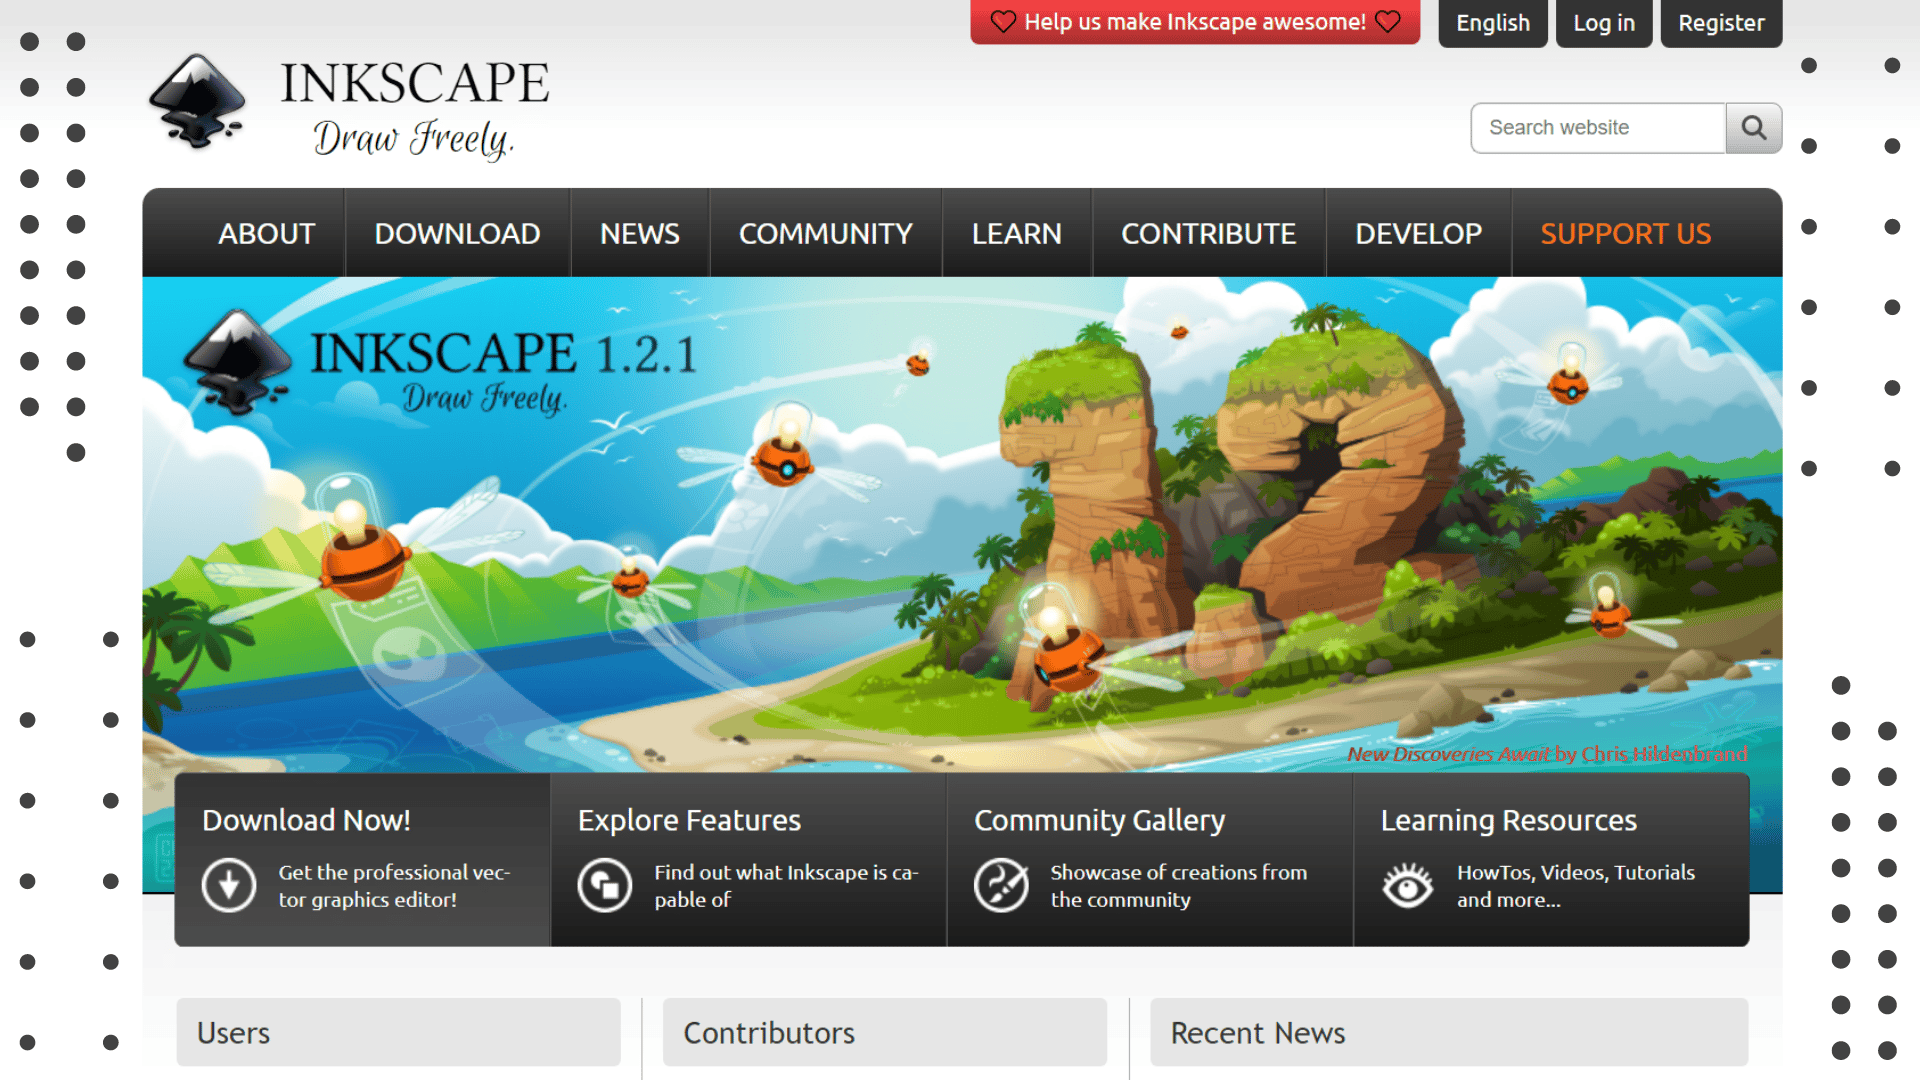 Inkscape Features